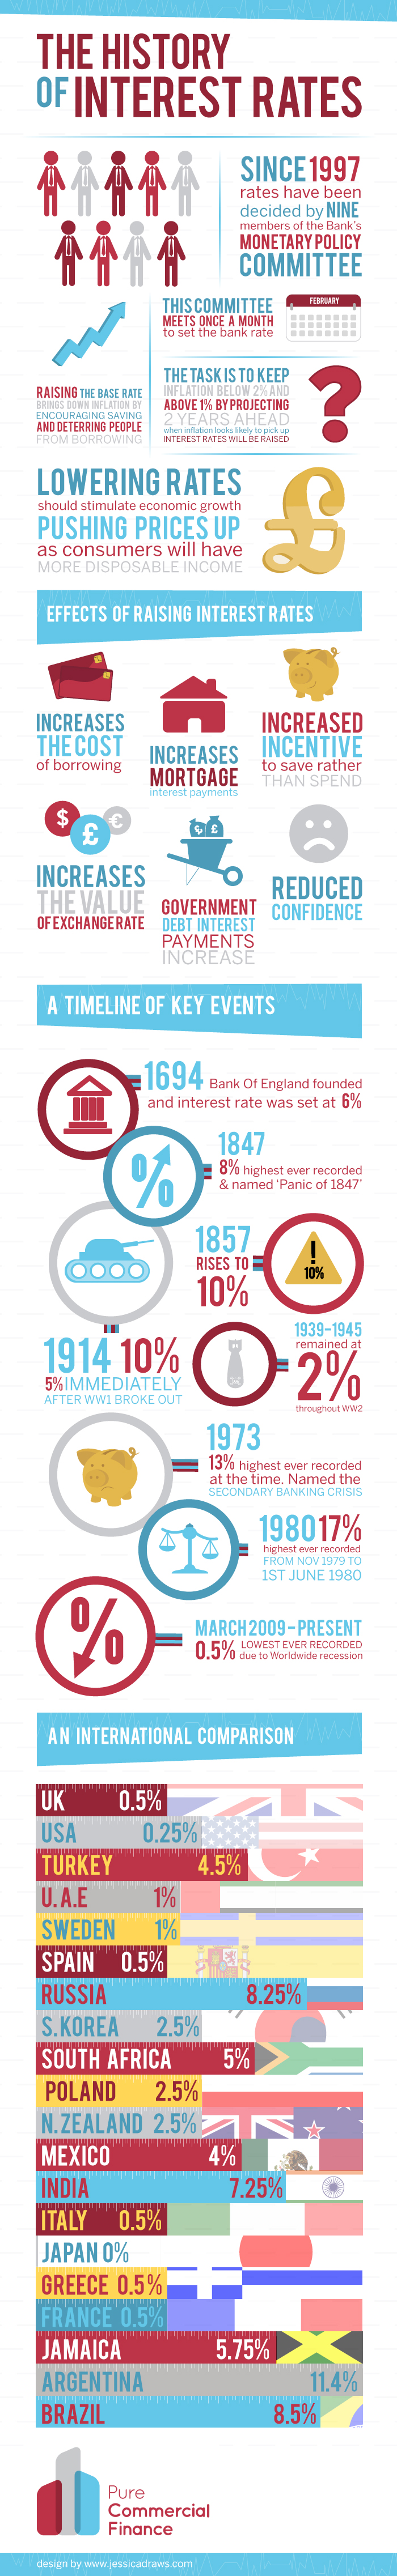 The History of Interest Rates